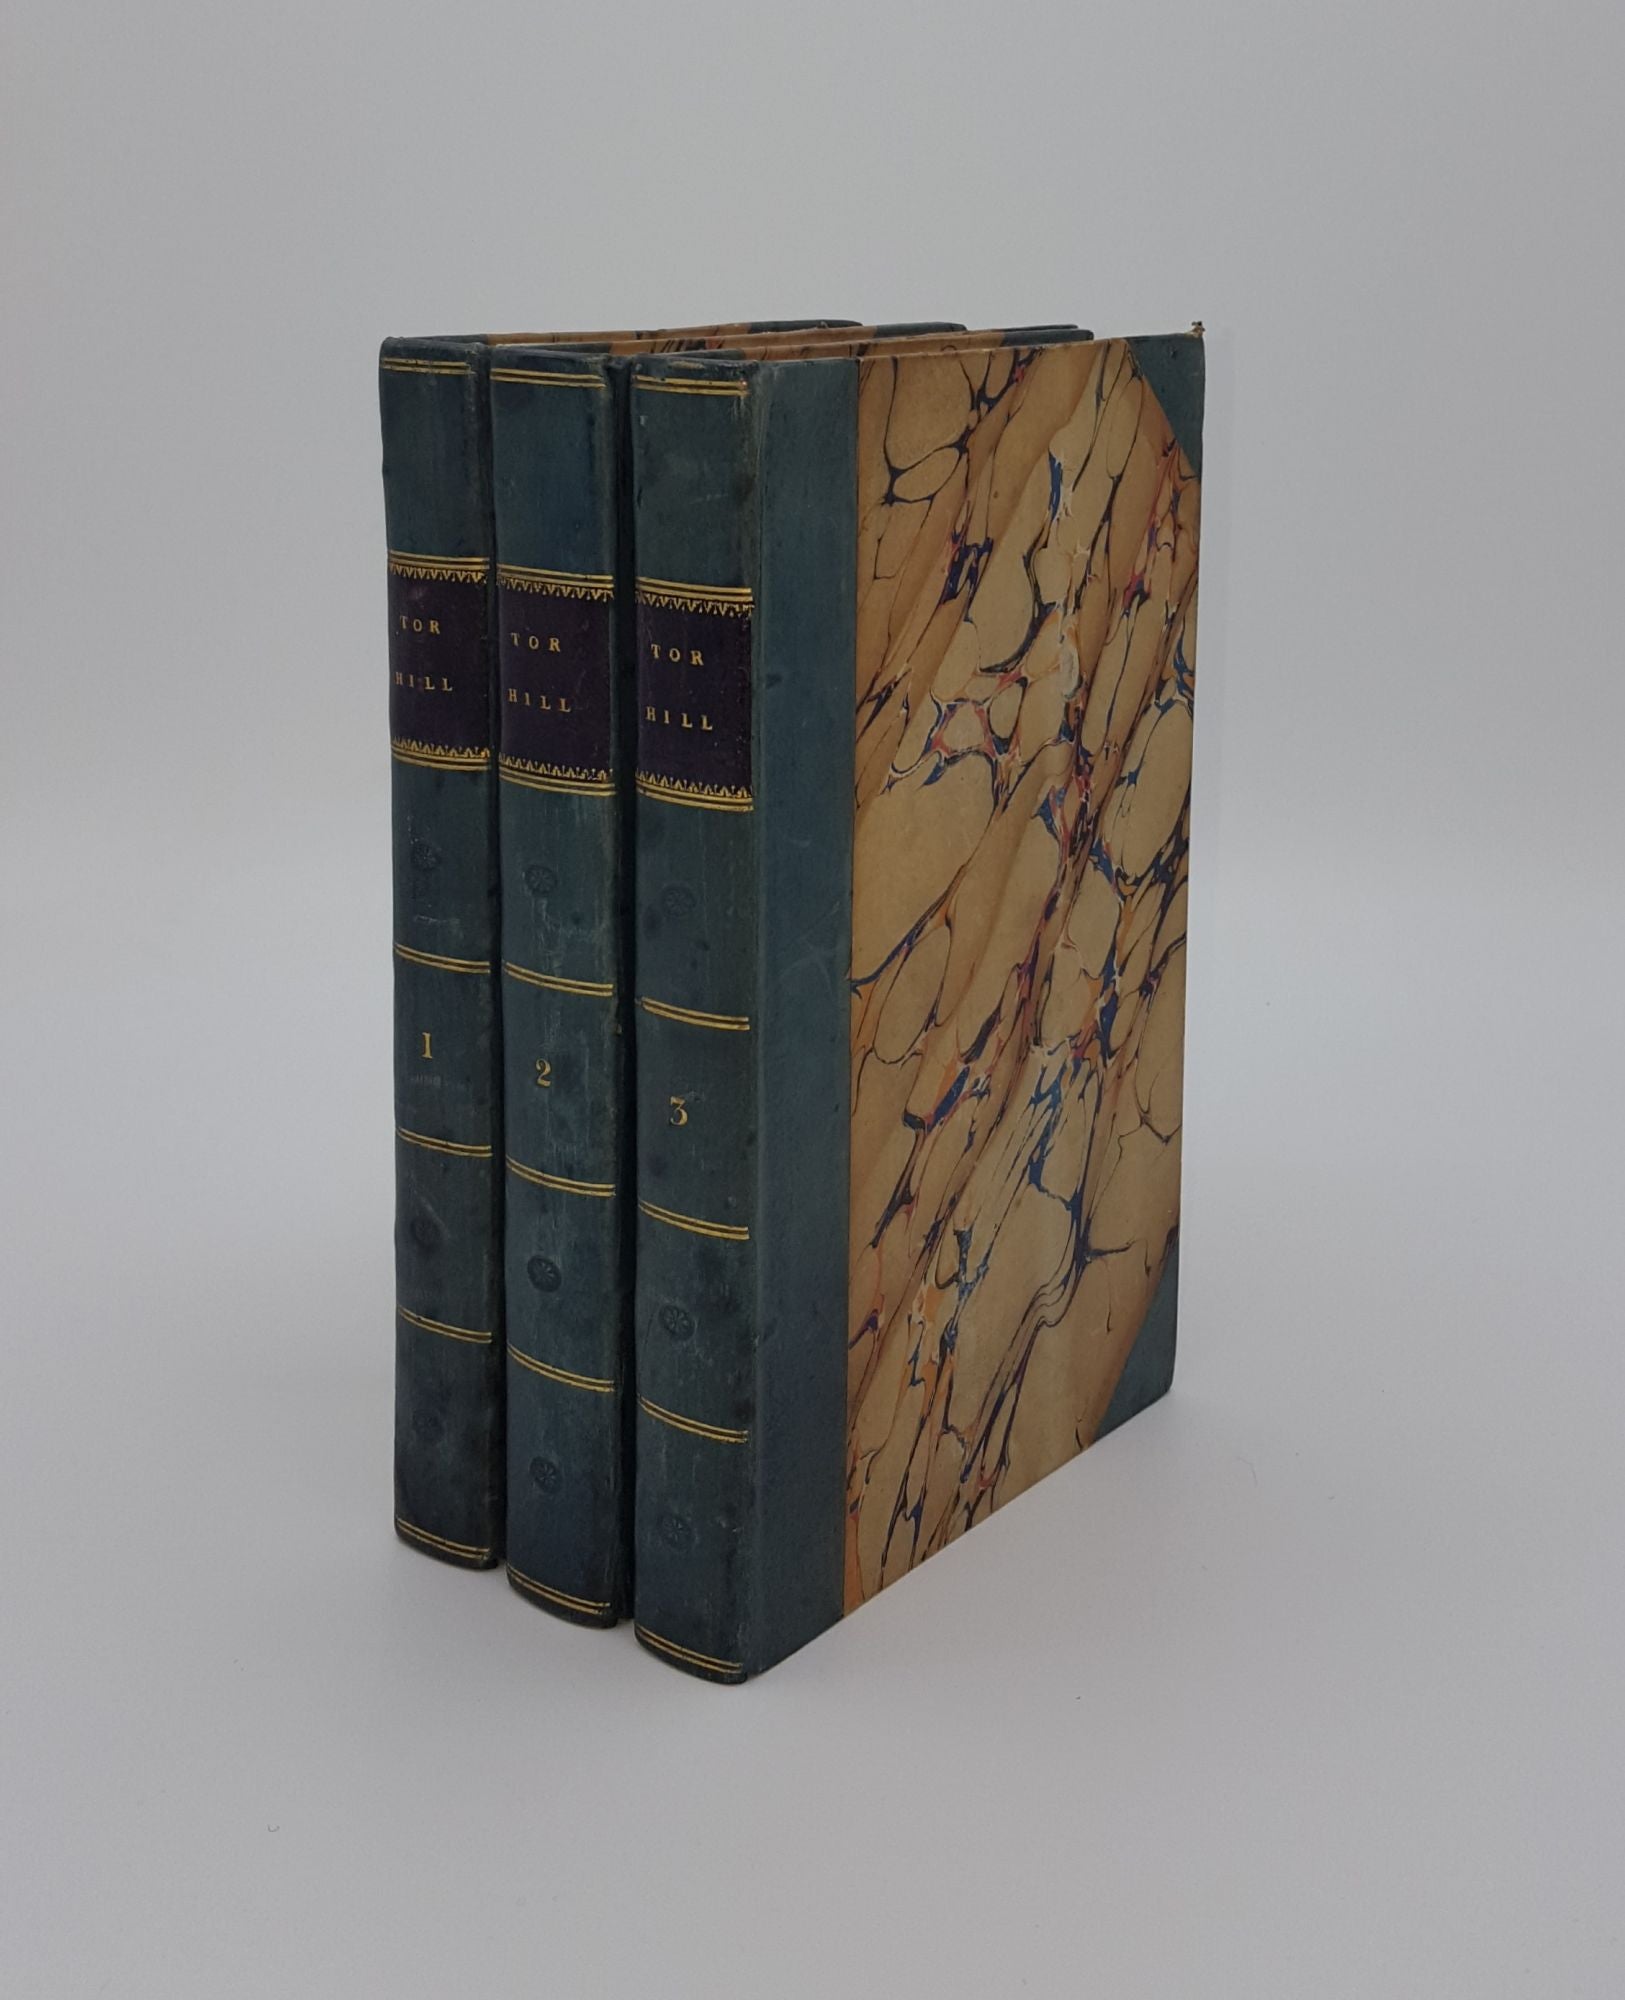 SMITH Horace - The Tor Hill in Three Volumes